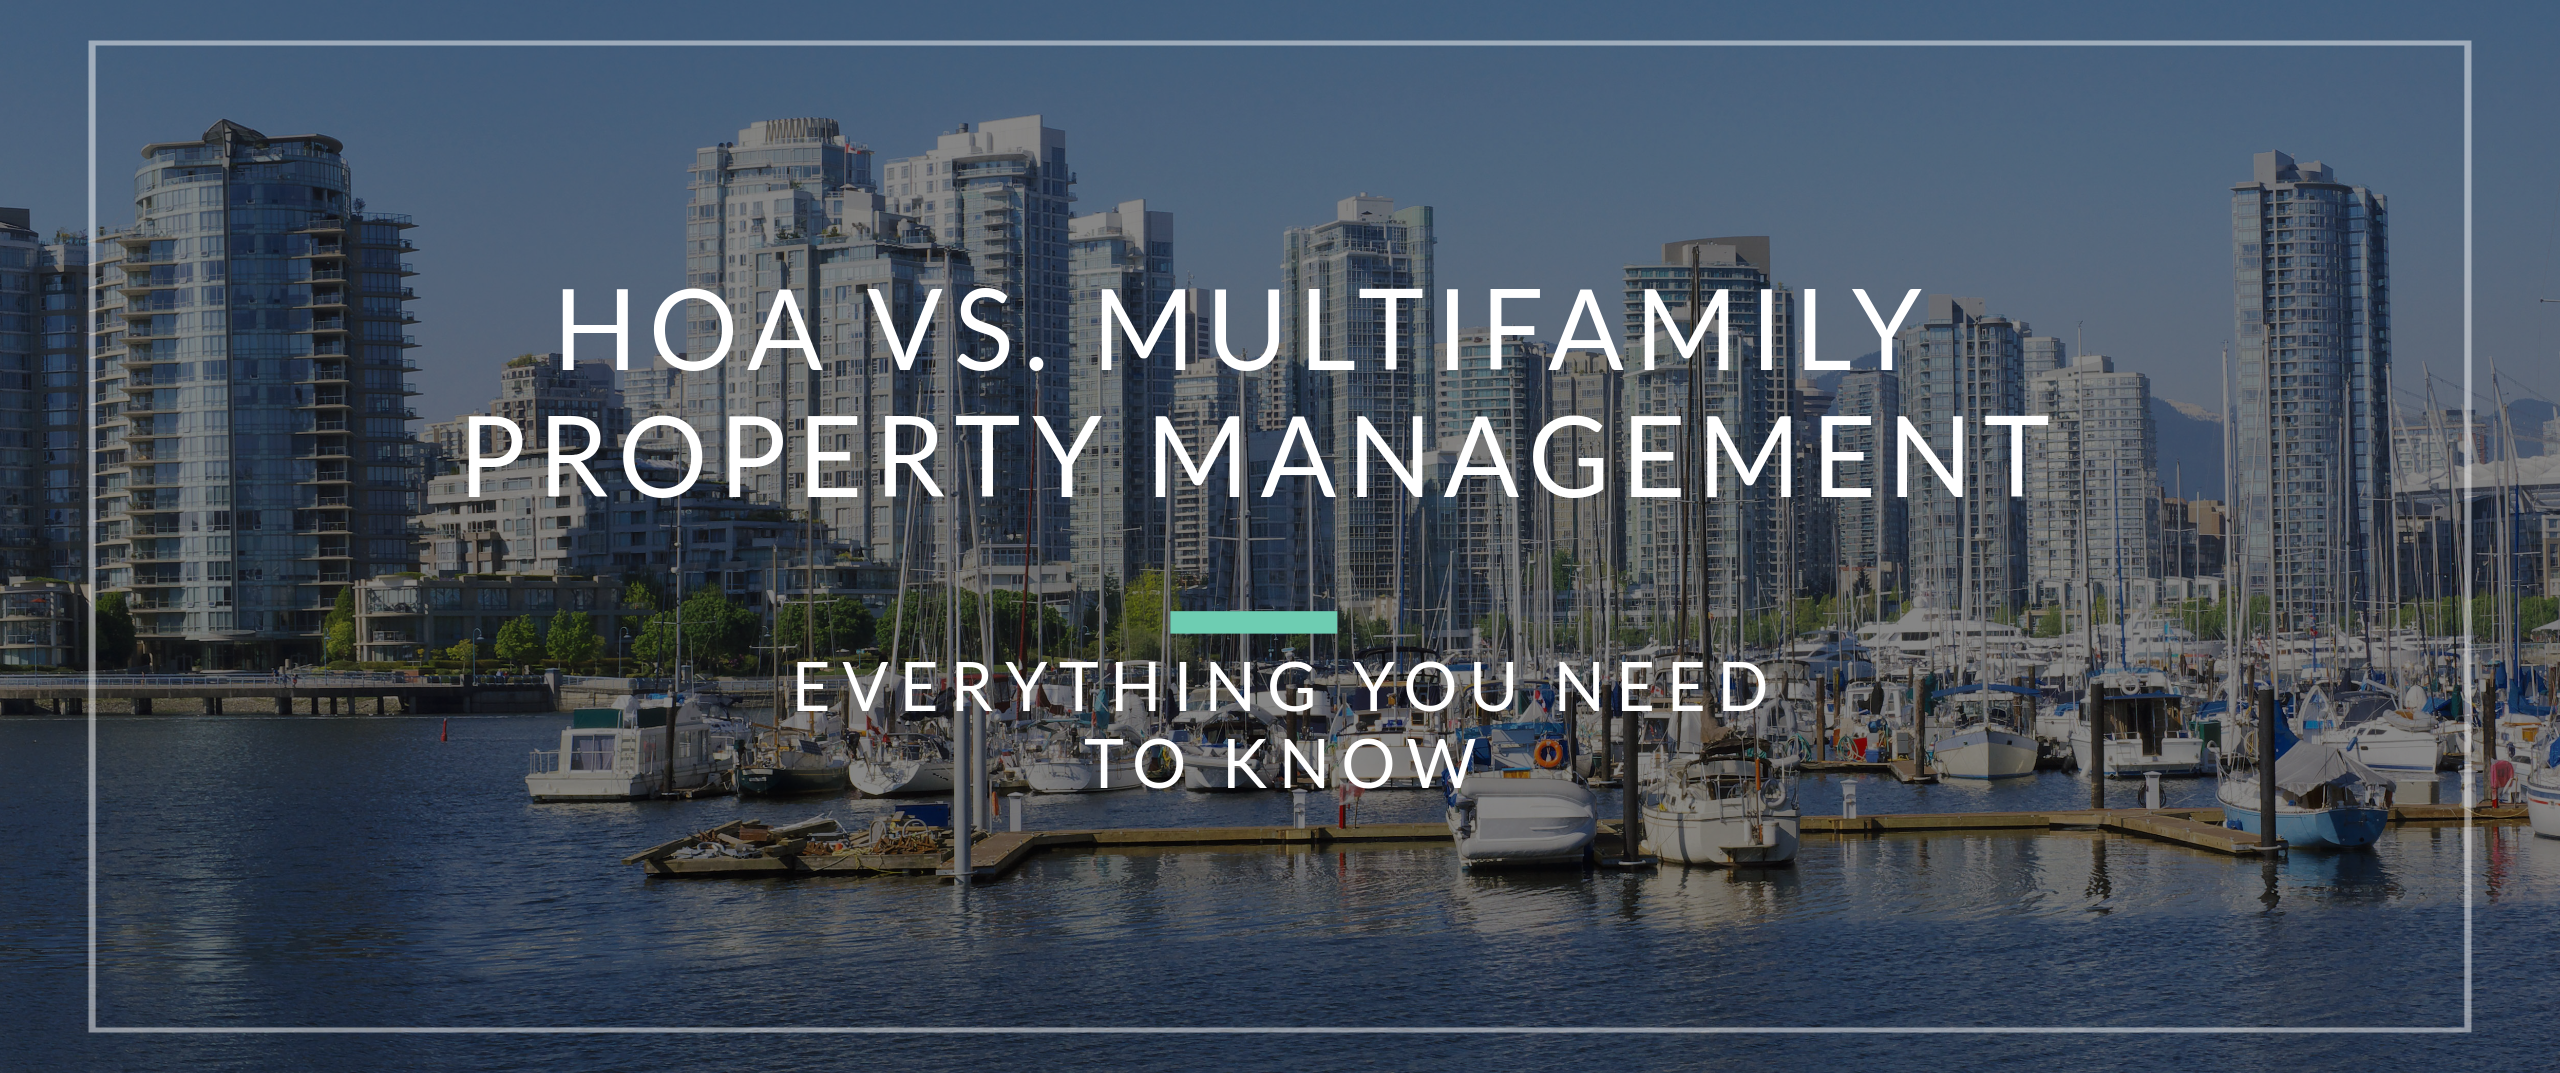 HOA vs Multifamily Property Management: A Complete Guide of the Differences